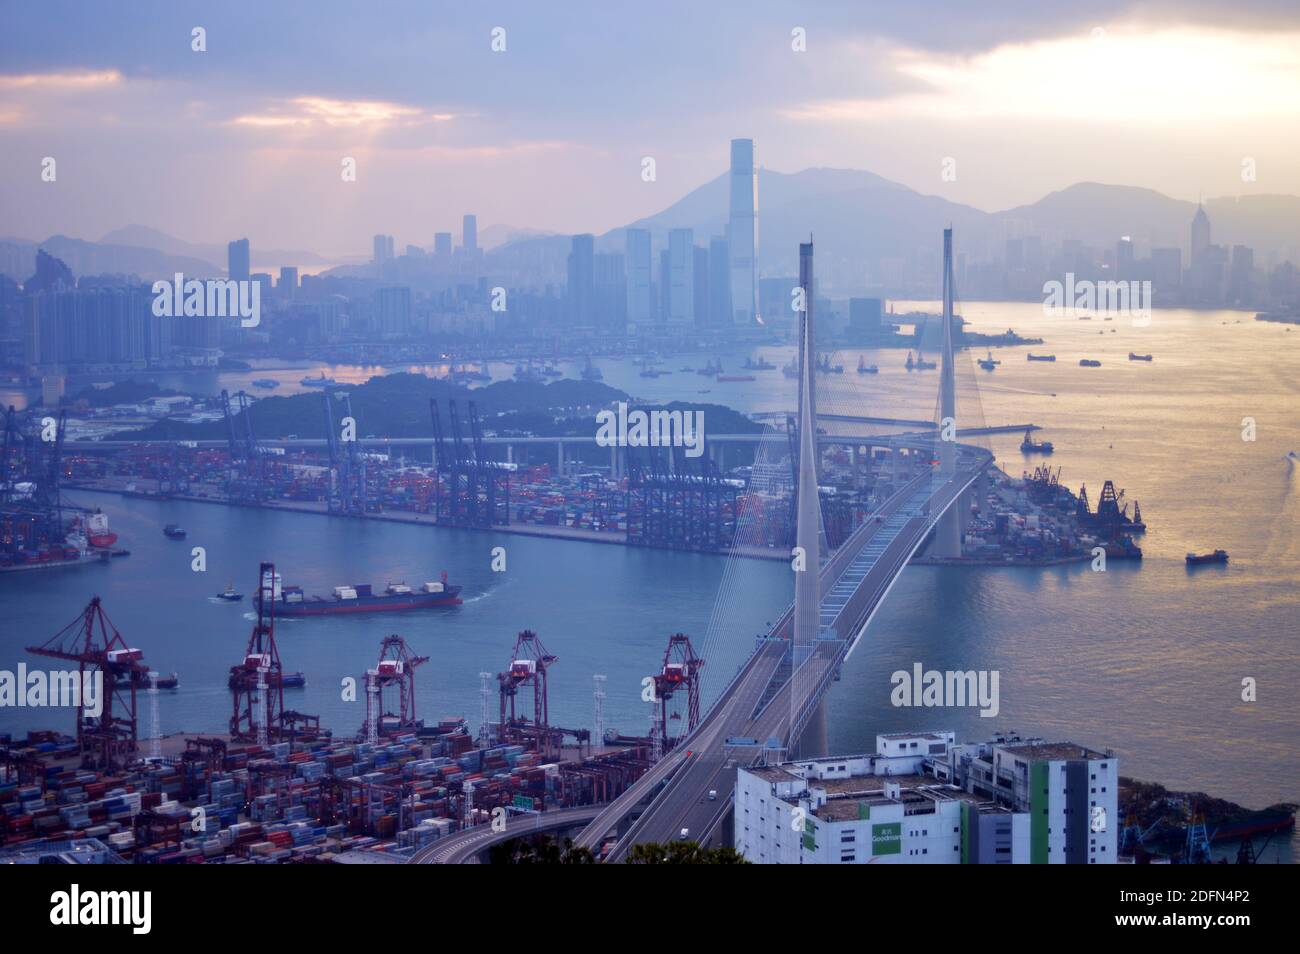 View of Hong Kong cityscape after sunrise (Stonecutters Bridge, Kwai Tsing Container Terminals, and skyline) Stock Photo